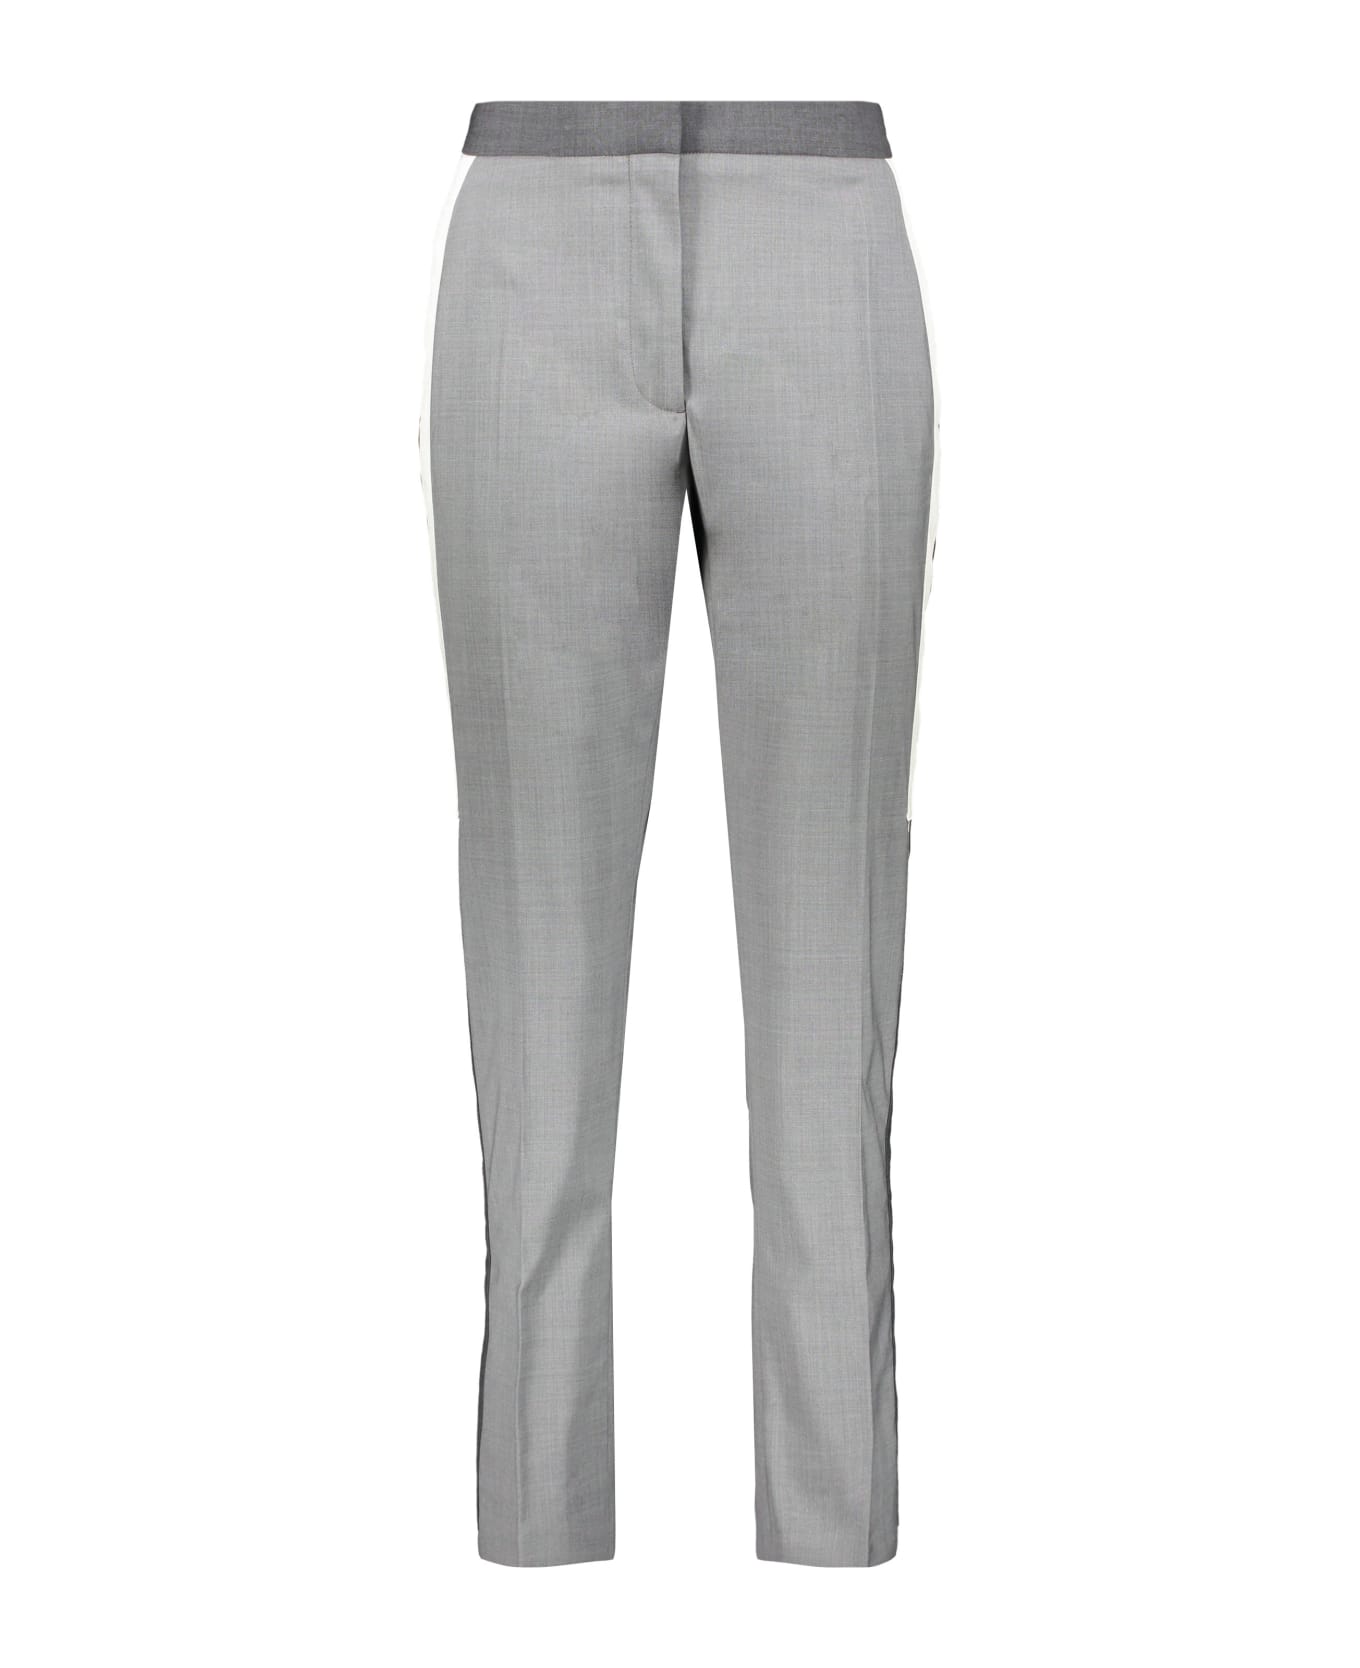 Burberry Wool Trousers - grey